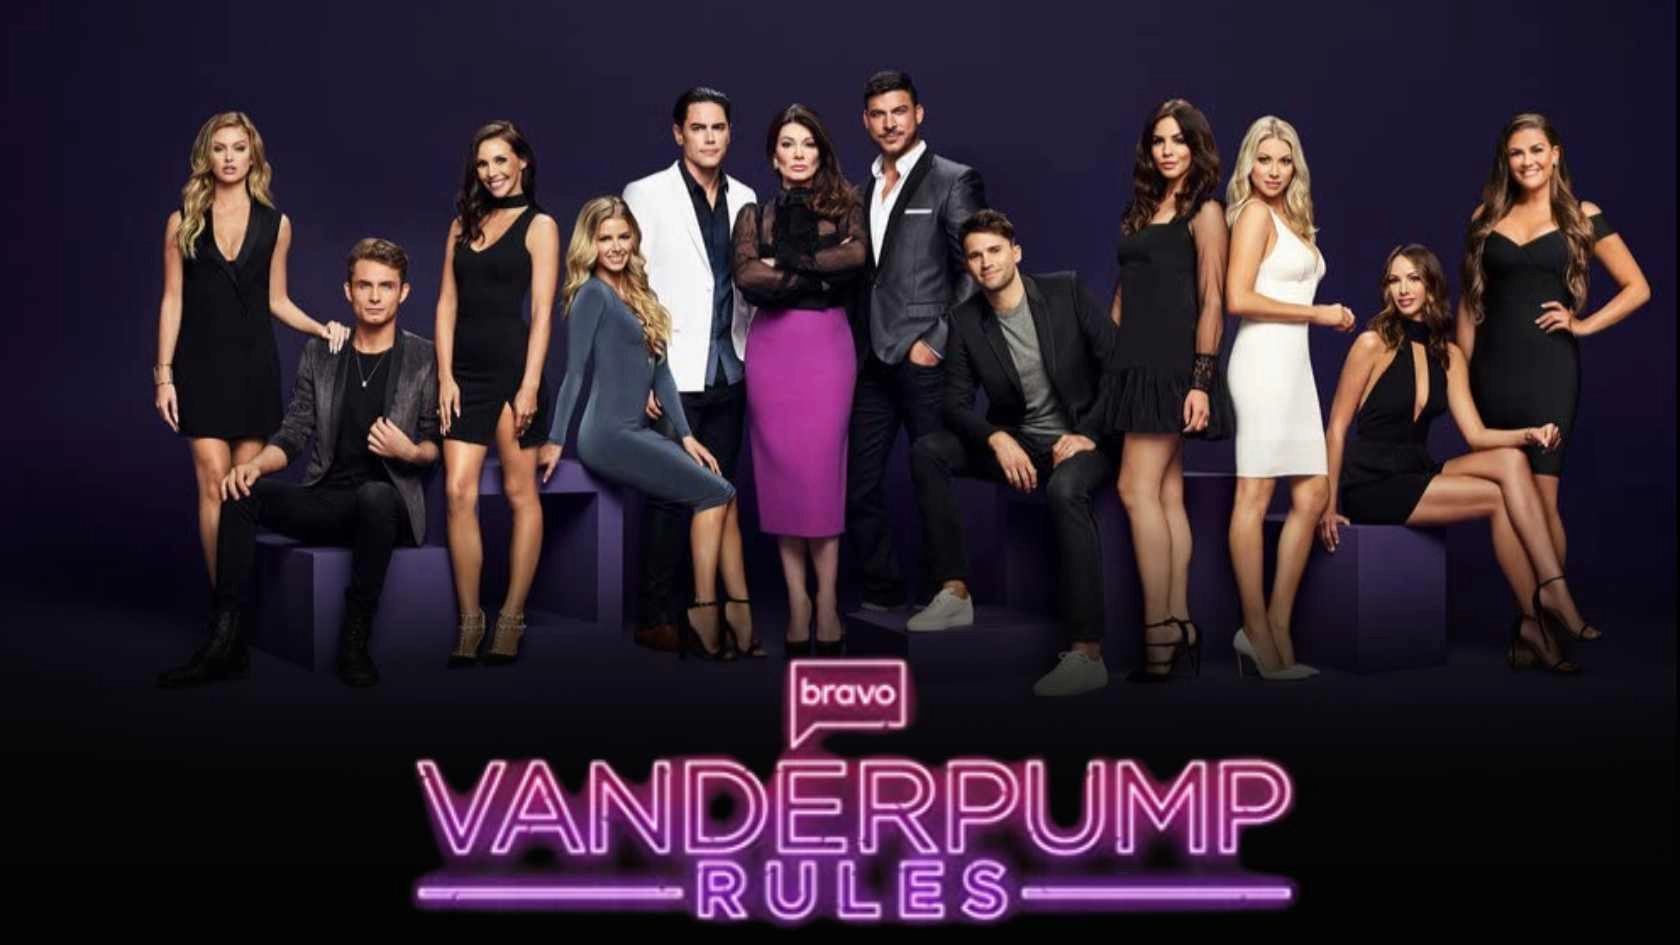 Vanderpump Rules Parents Guide and Age Rating (2013-)